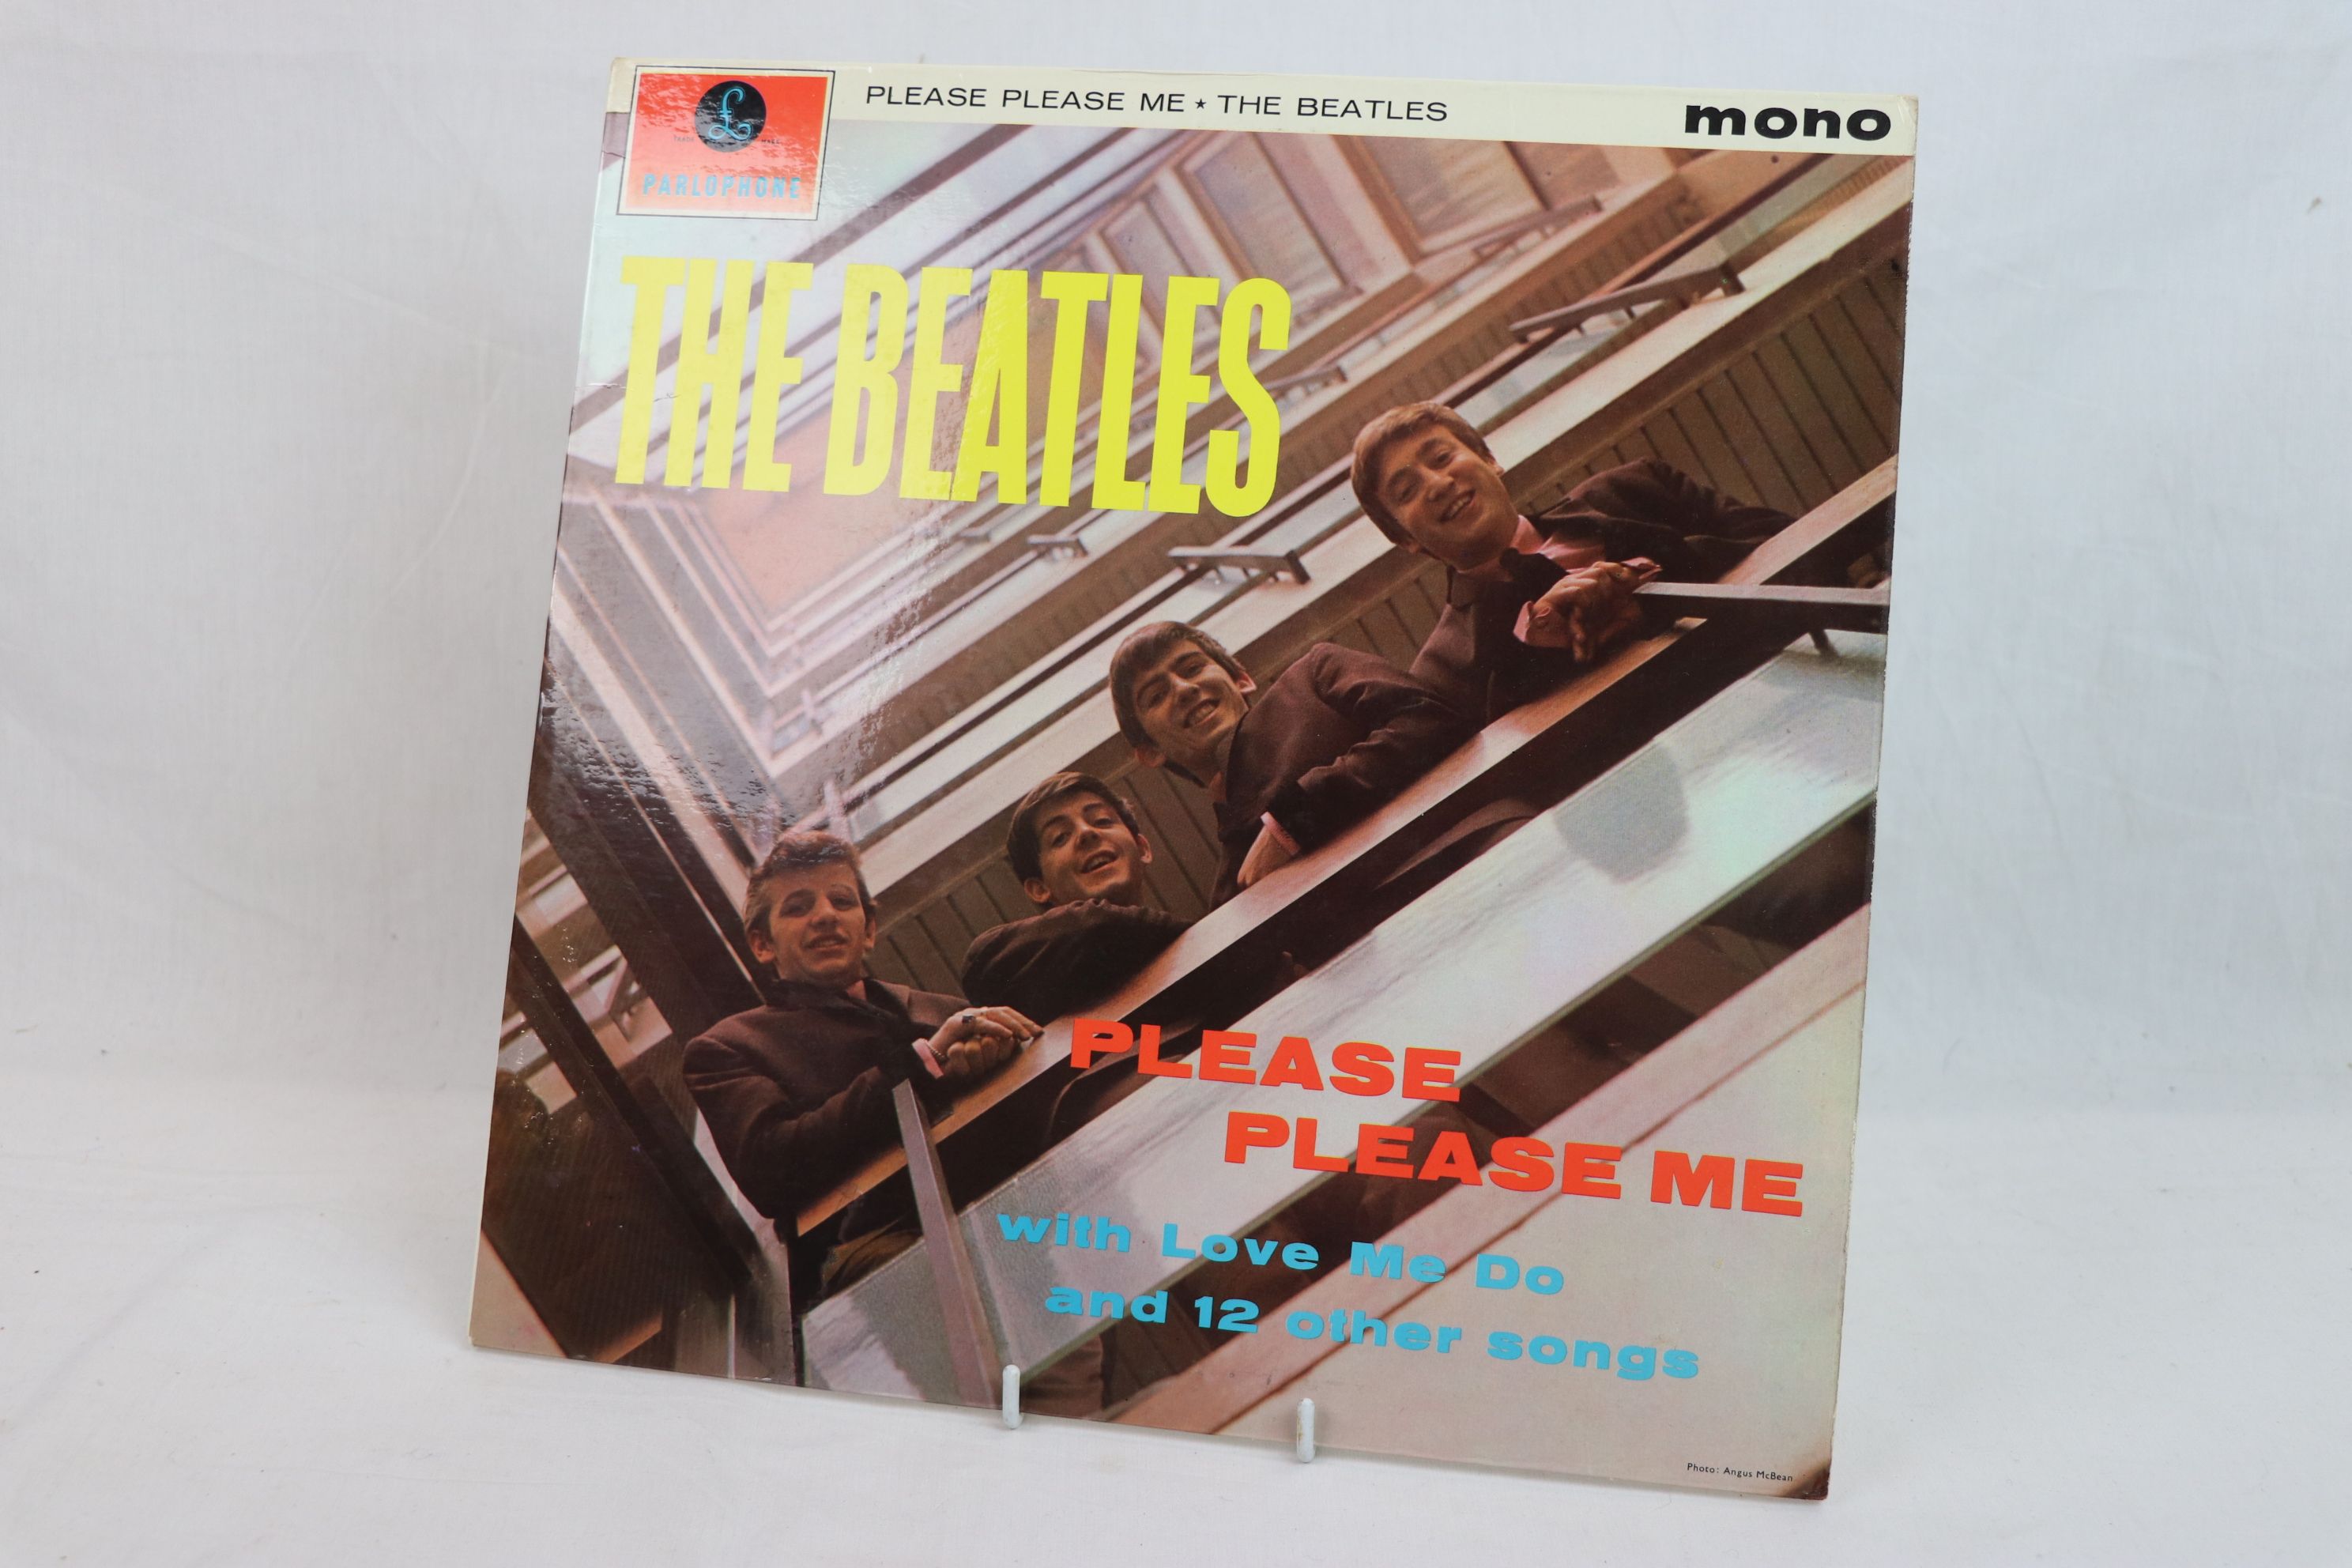 Vinyl - The Beatles Please Please Me LP on Parlophone PMC1202 gold and black label, Dick James Music